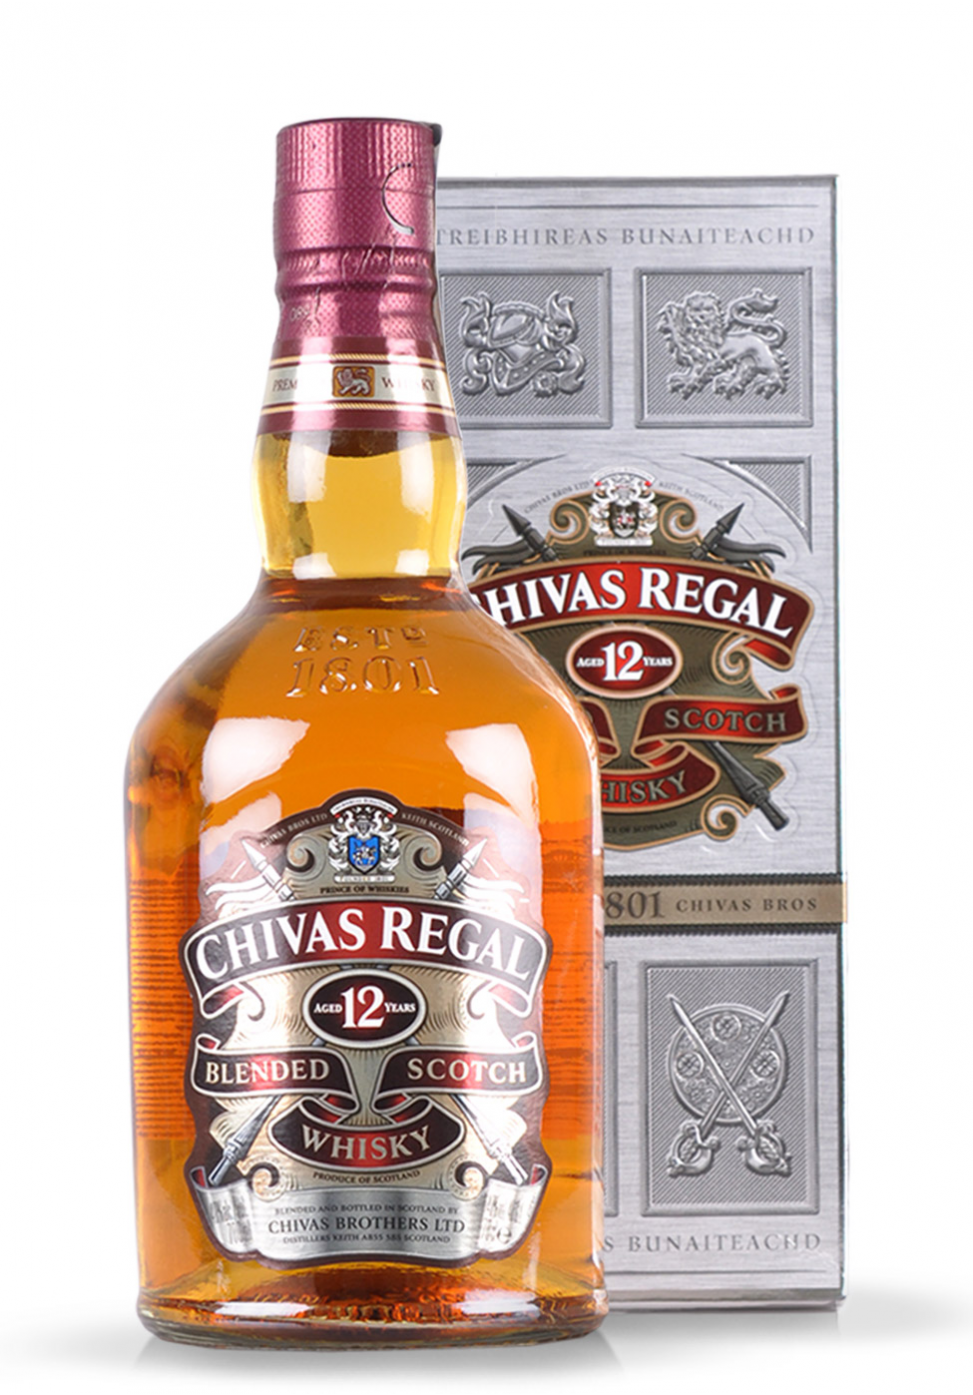 CHIVAS REGAL BLENDED SCOTCH WHISKEY LTR for only $34.99 in